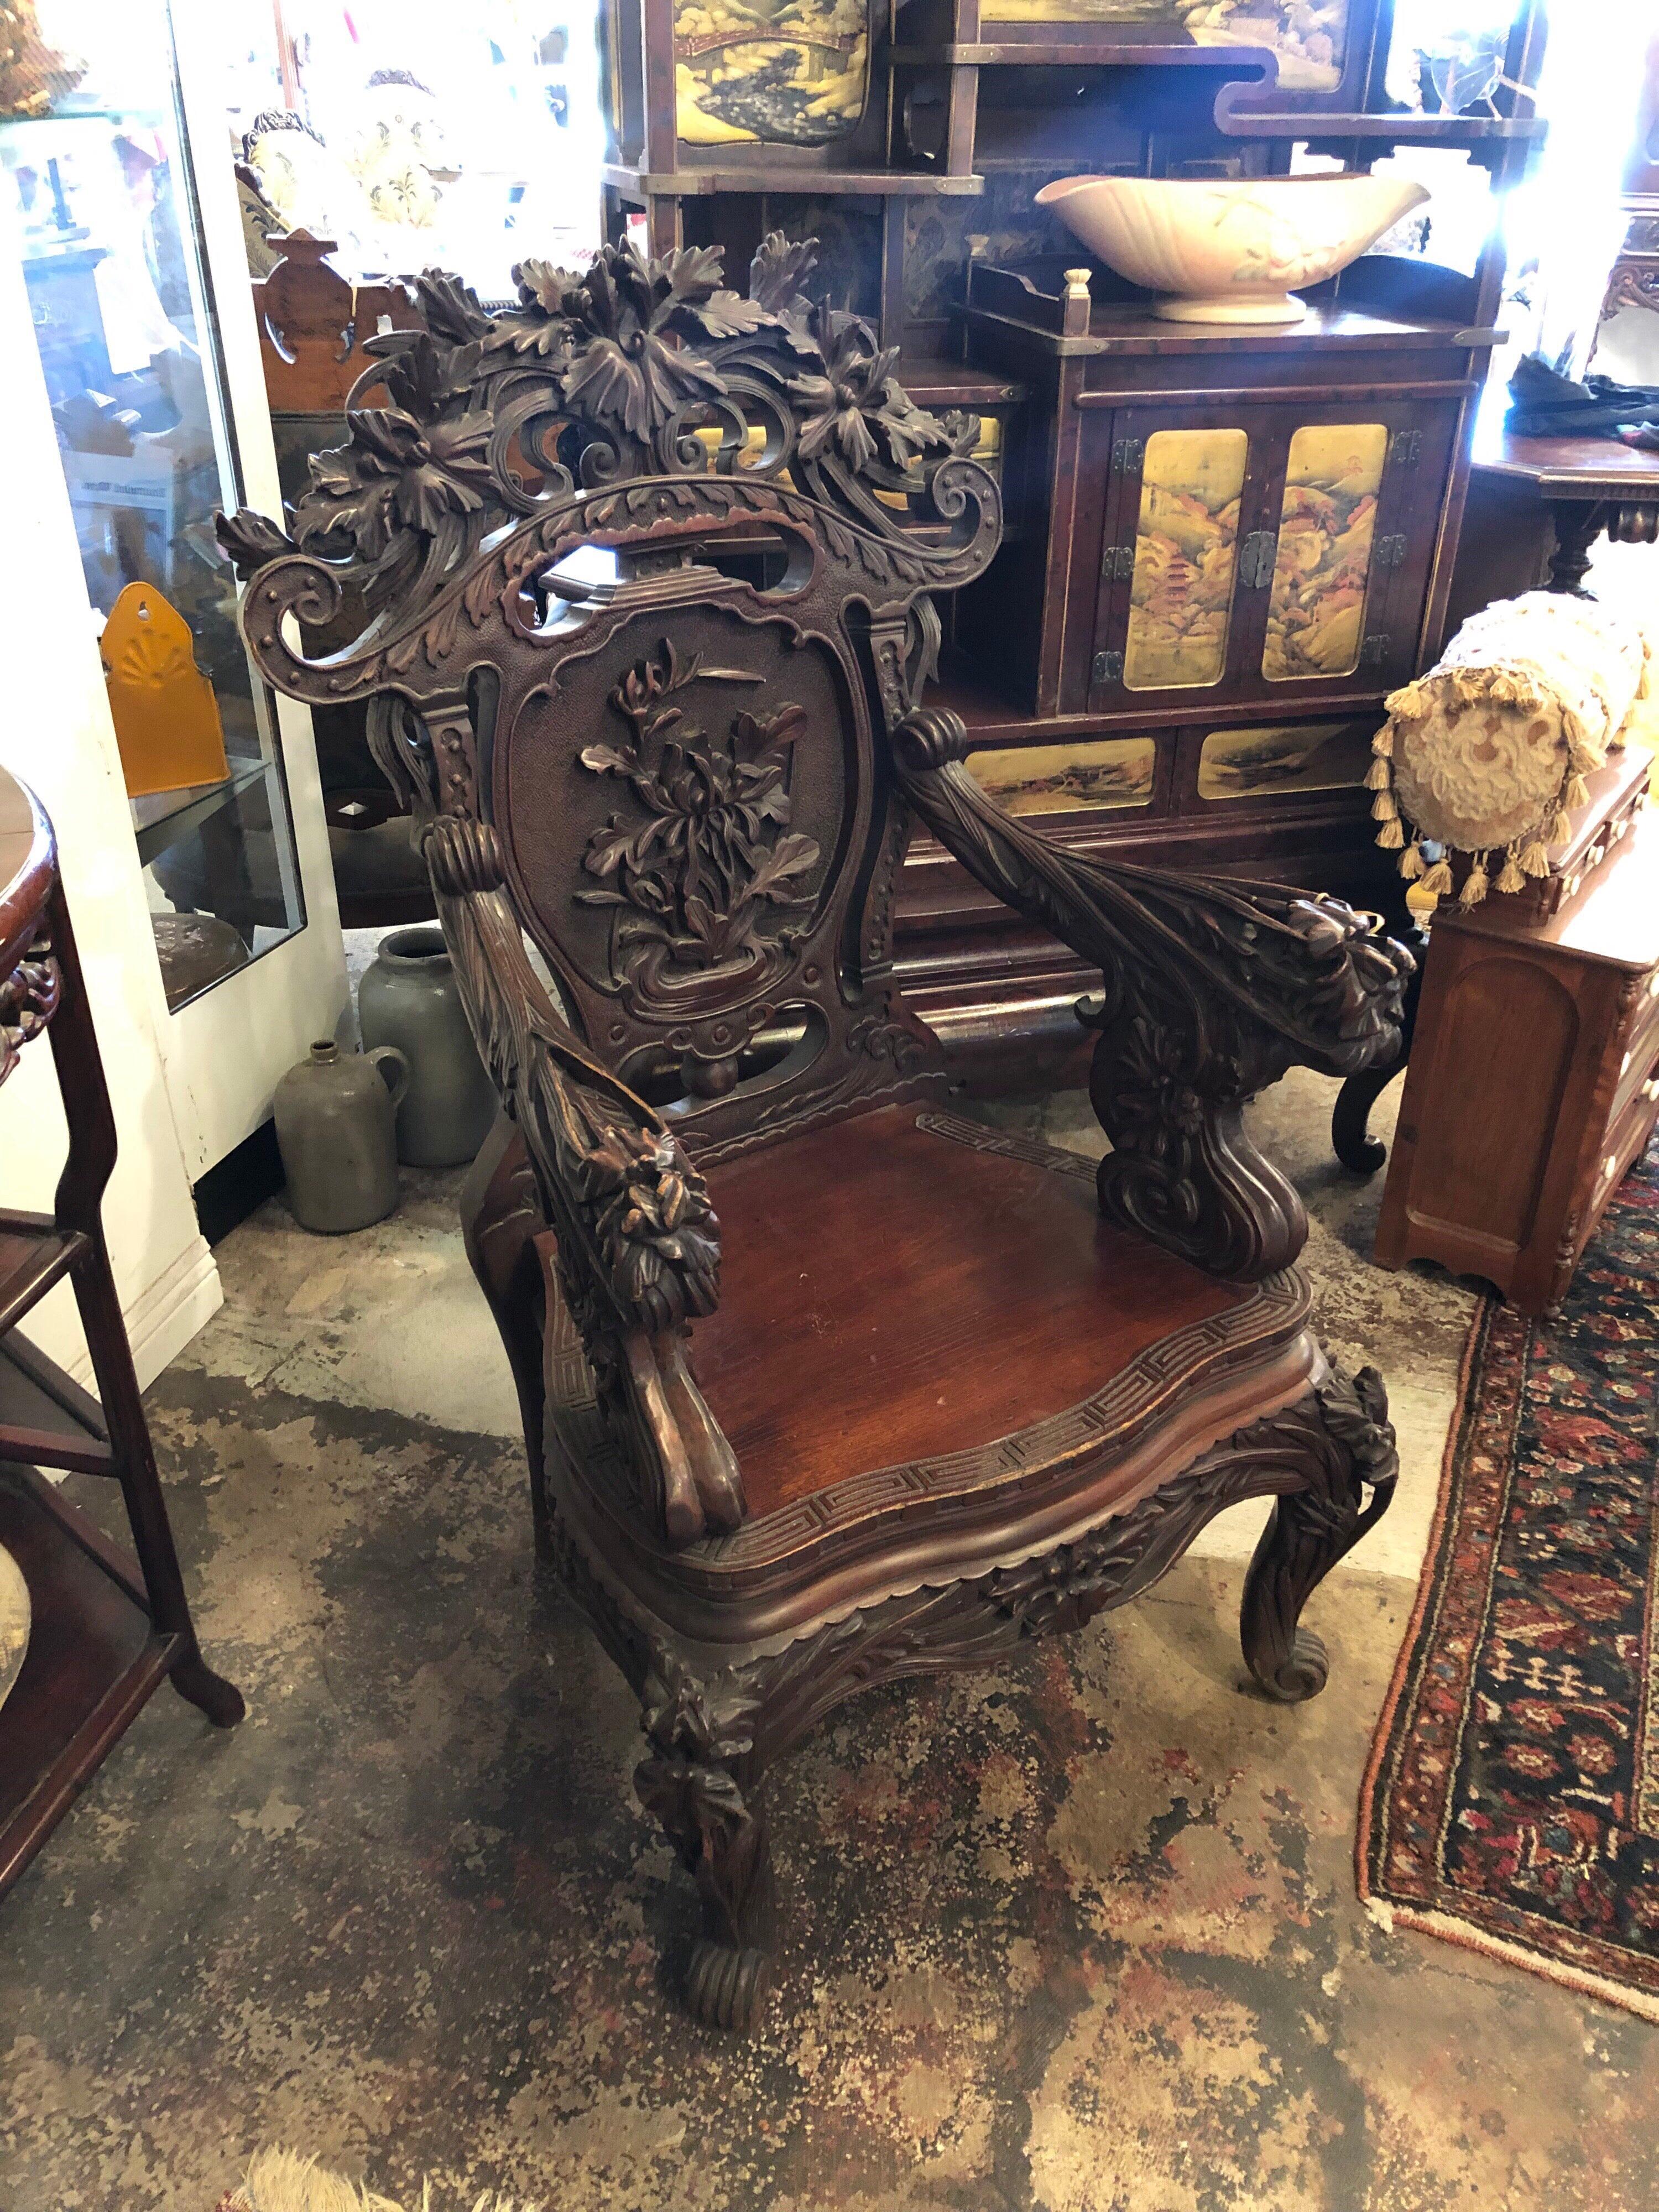 Japanese Export Highly Carved Dragon Themed Chair.
Having a large carved dragon on the back area with dragon handles and an etching of waves on the seat. 